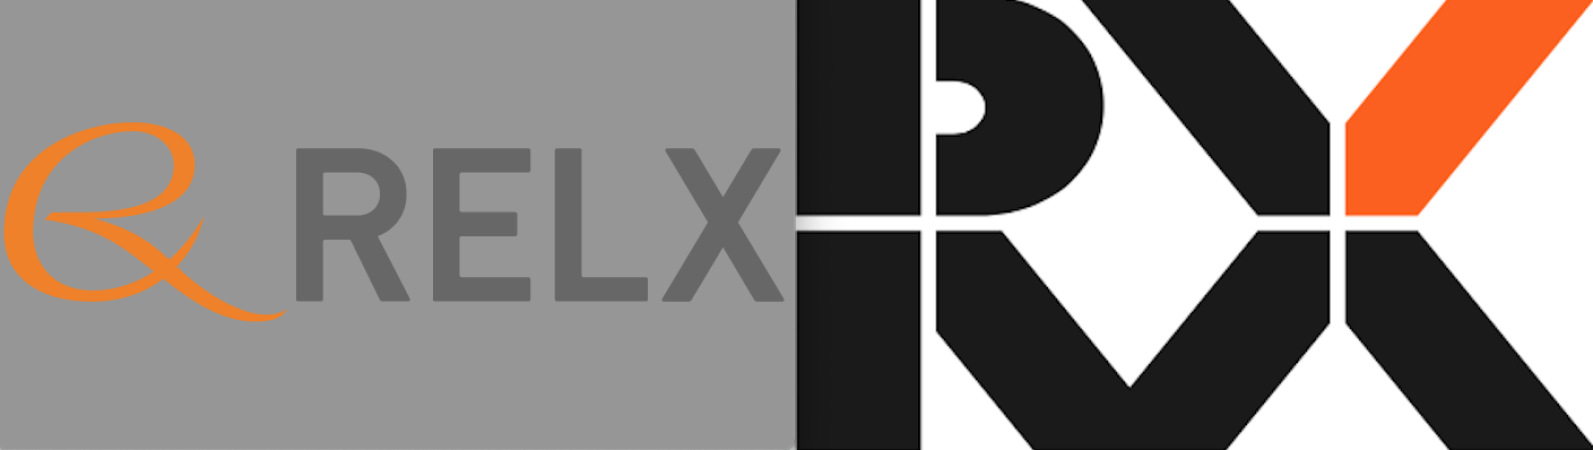 The RX and RELX logos